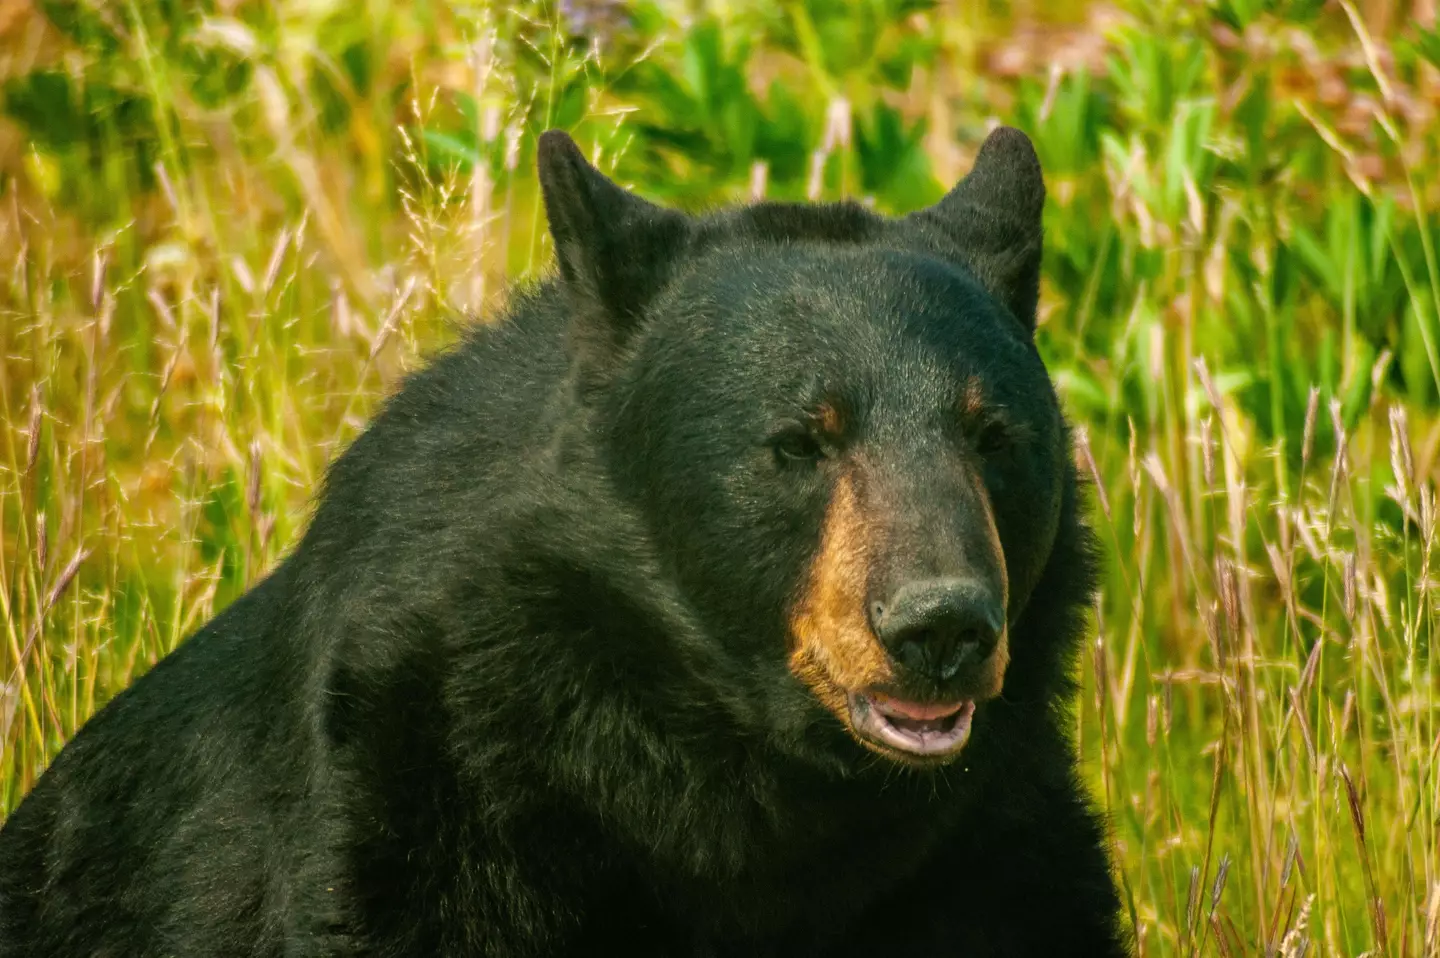 The Canadian black bear's skin is used to make the hats.